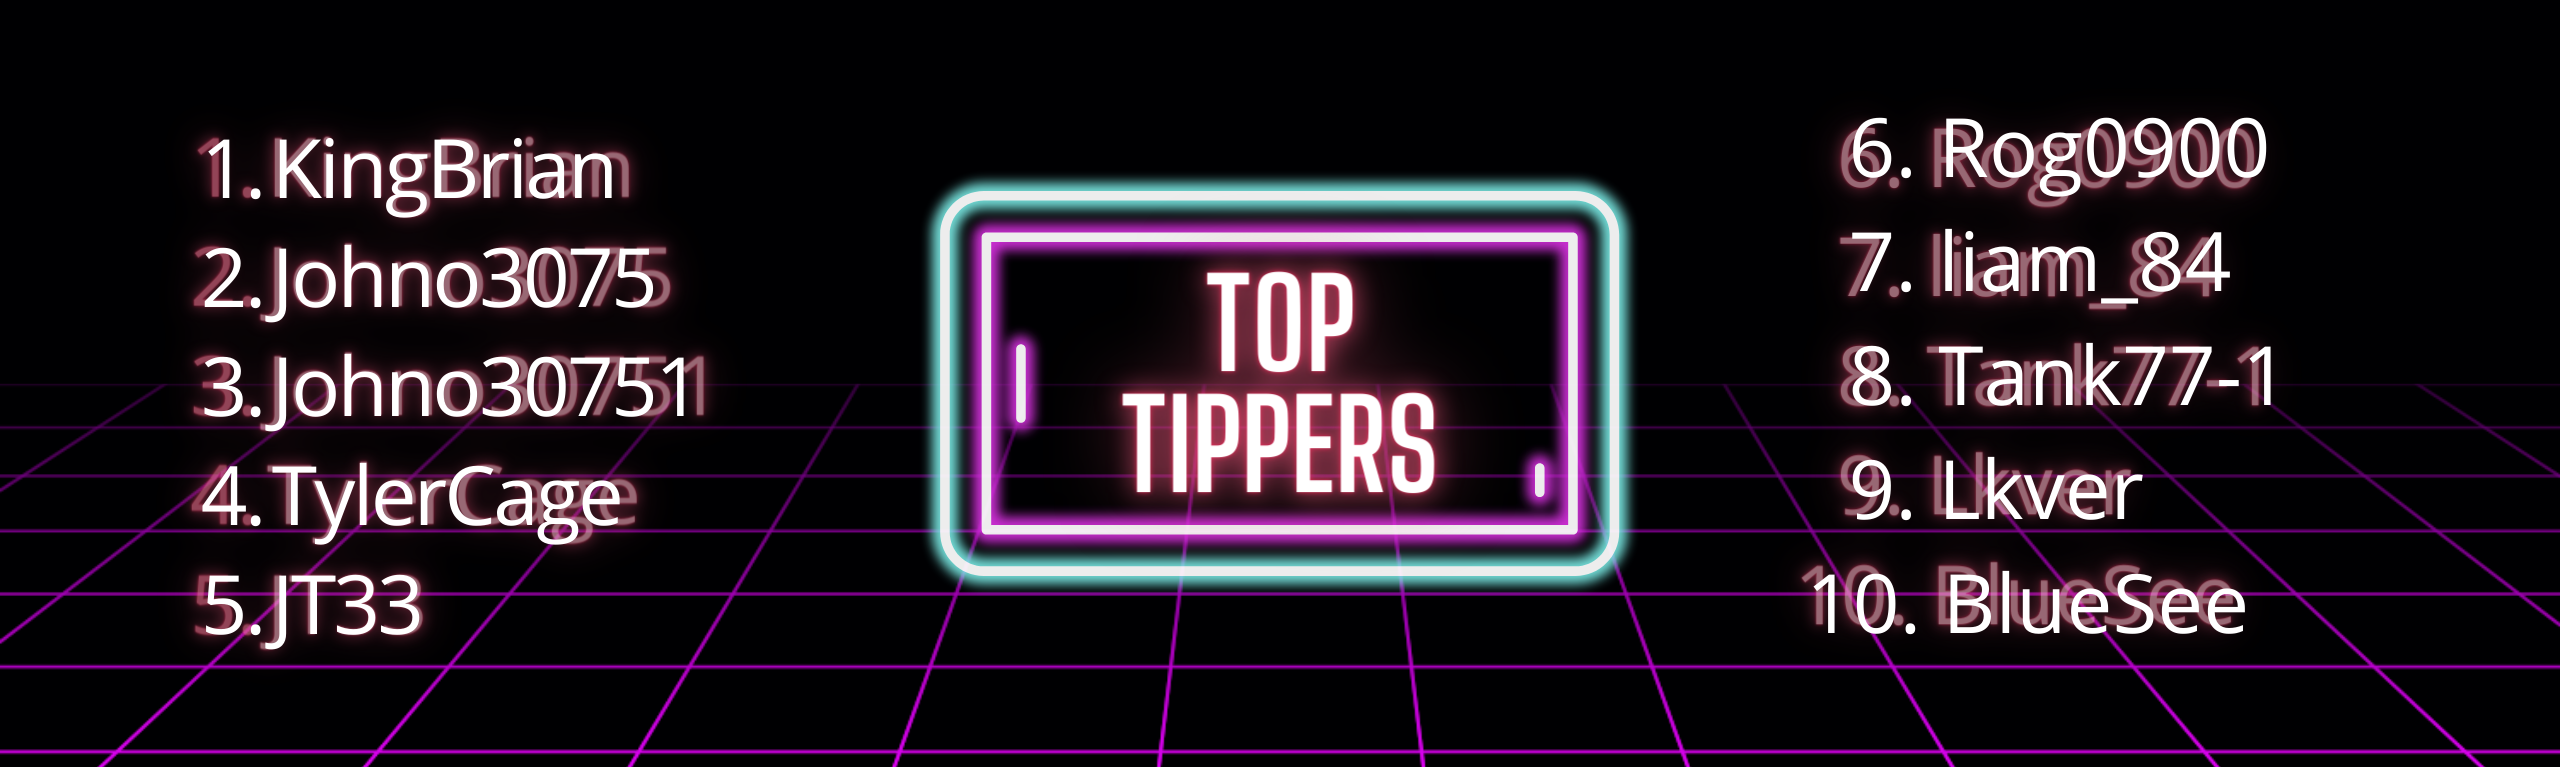 AnnieHuntters Top Tipper image: 1